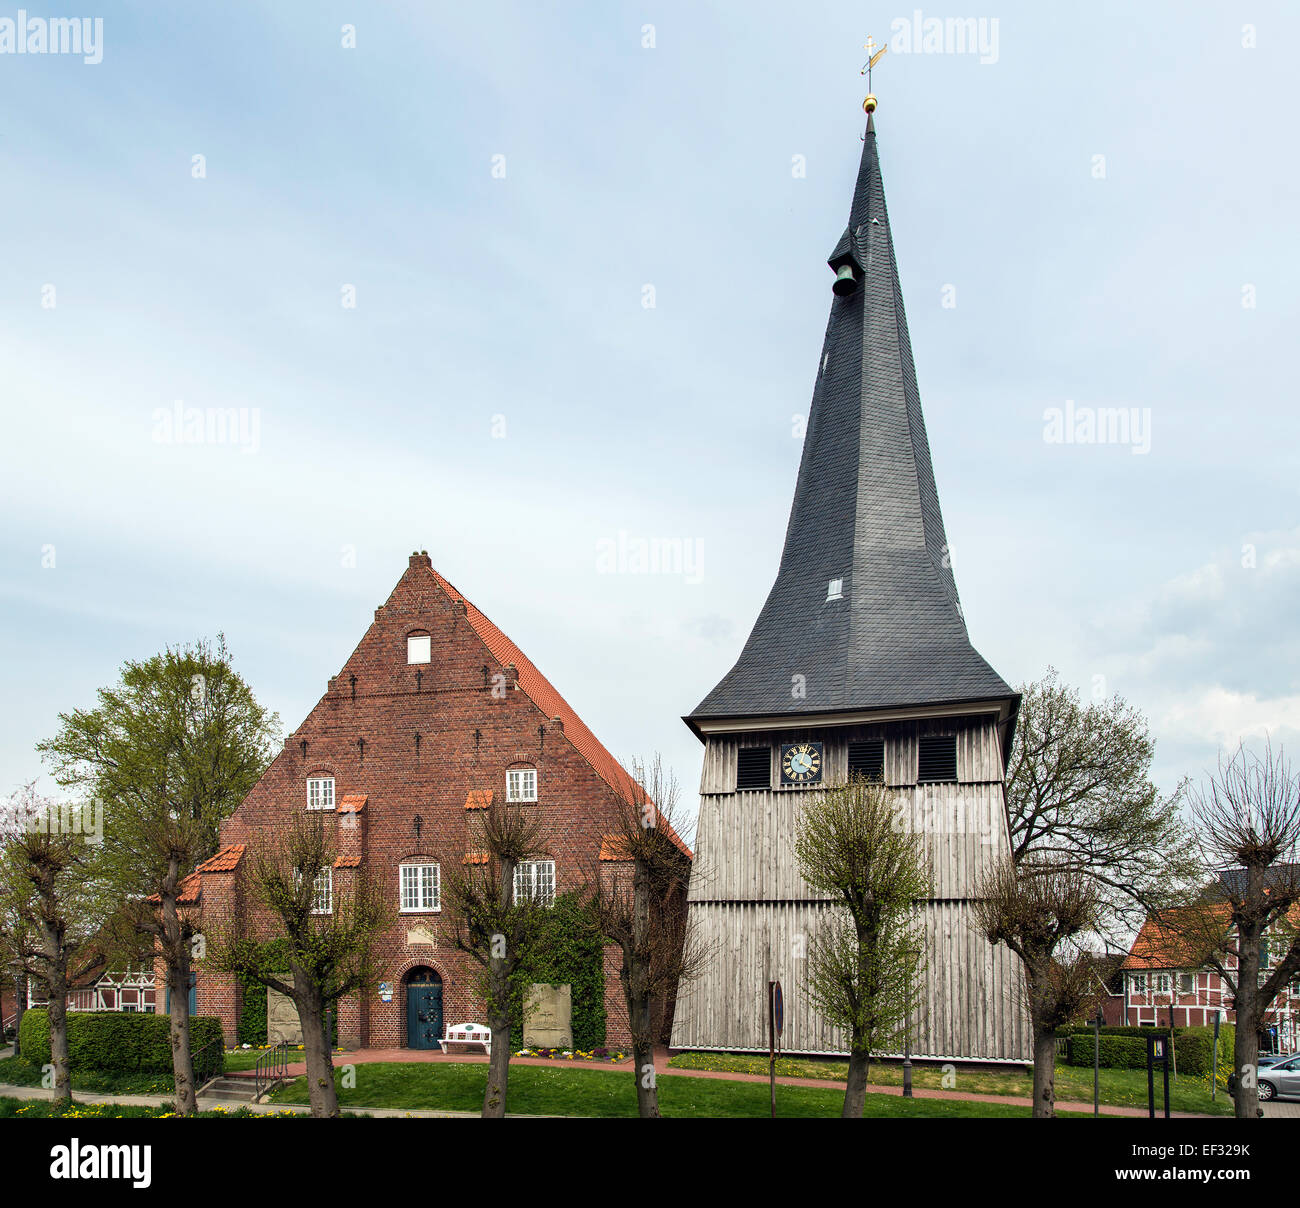 St. Matthias church with wooden tower in 1685, Jork, Altes Land, Lower Saxony, Germany Stock Photo